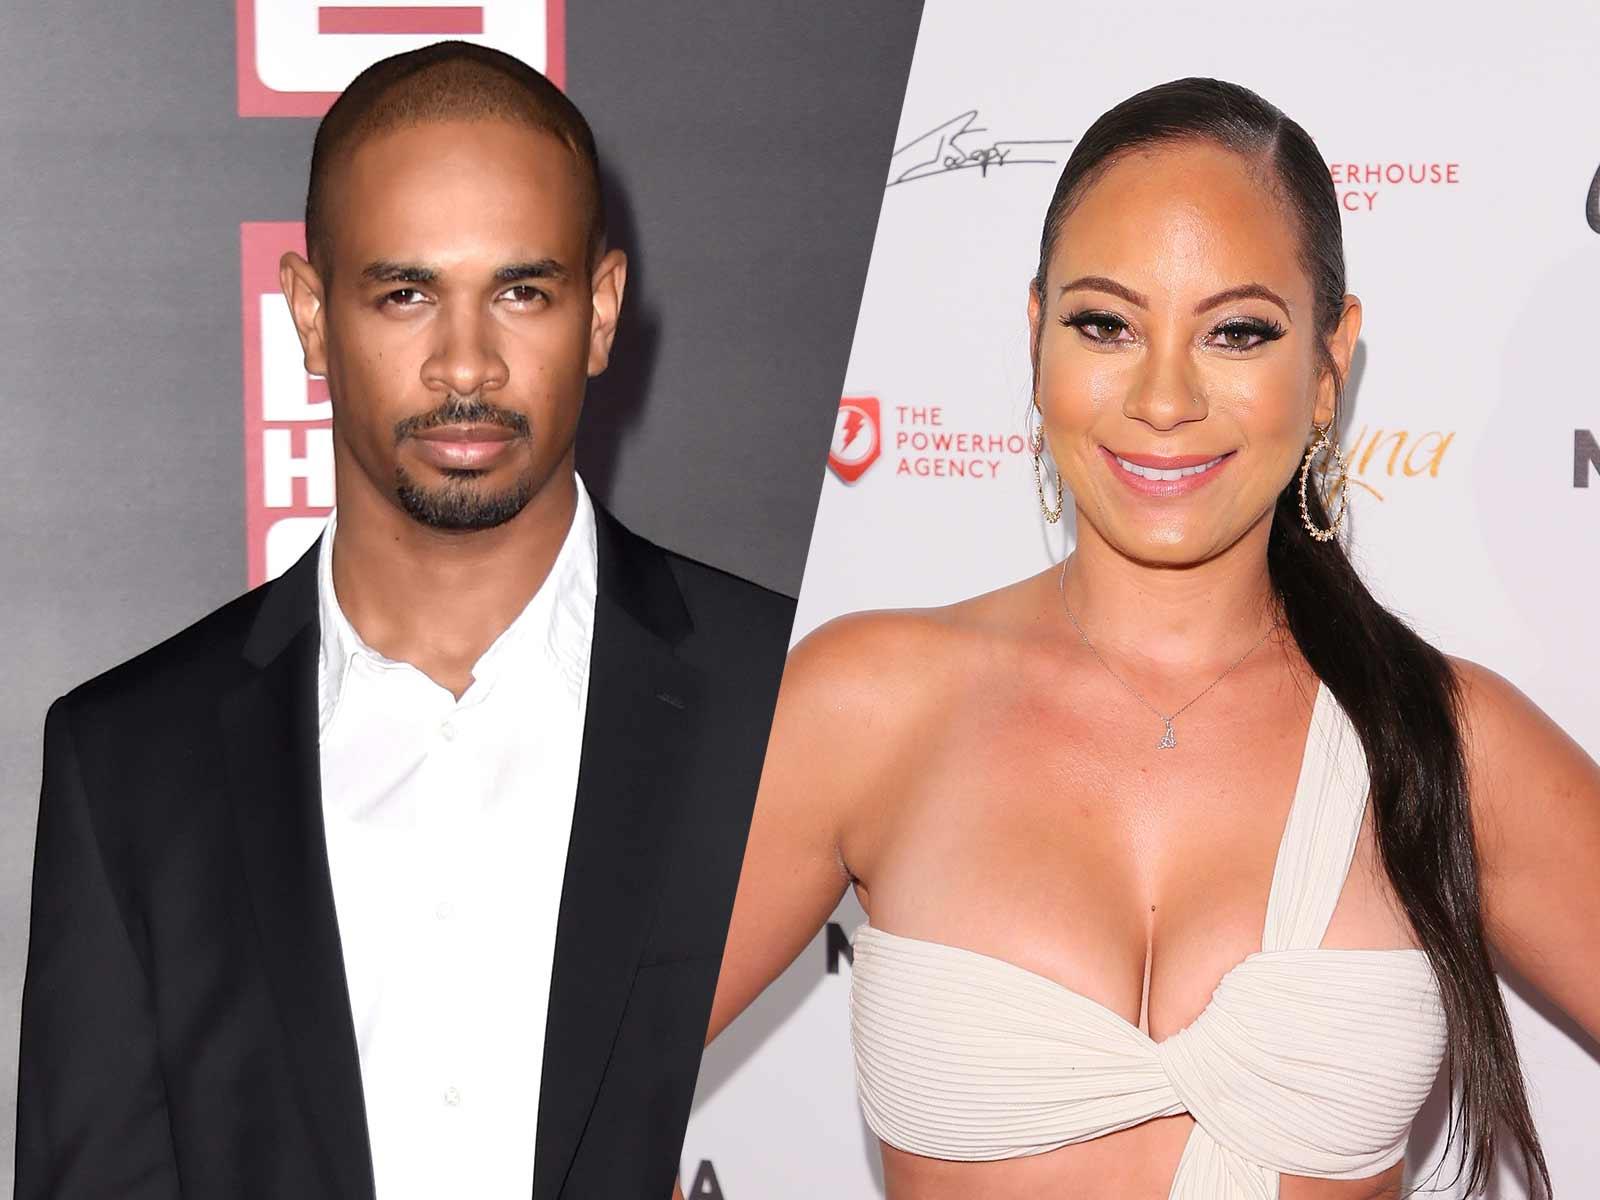 ‘Basketball Wives’ Star Claims Damon Wayans Jr. Custody Fight is About Paying Less Money